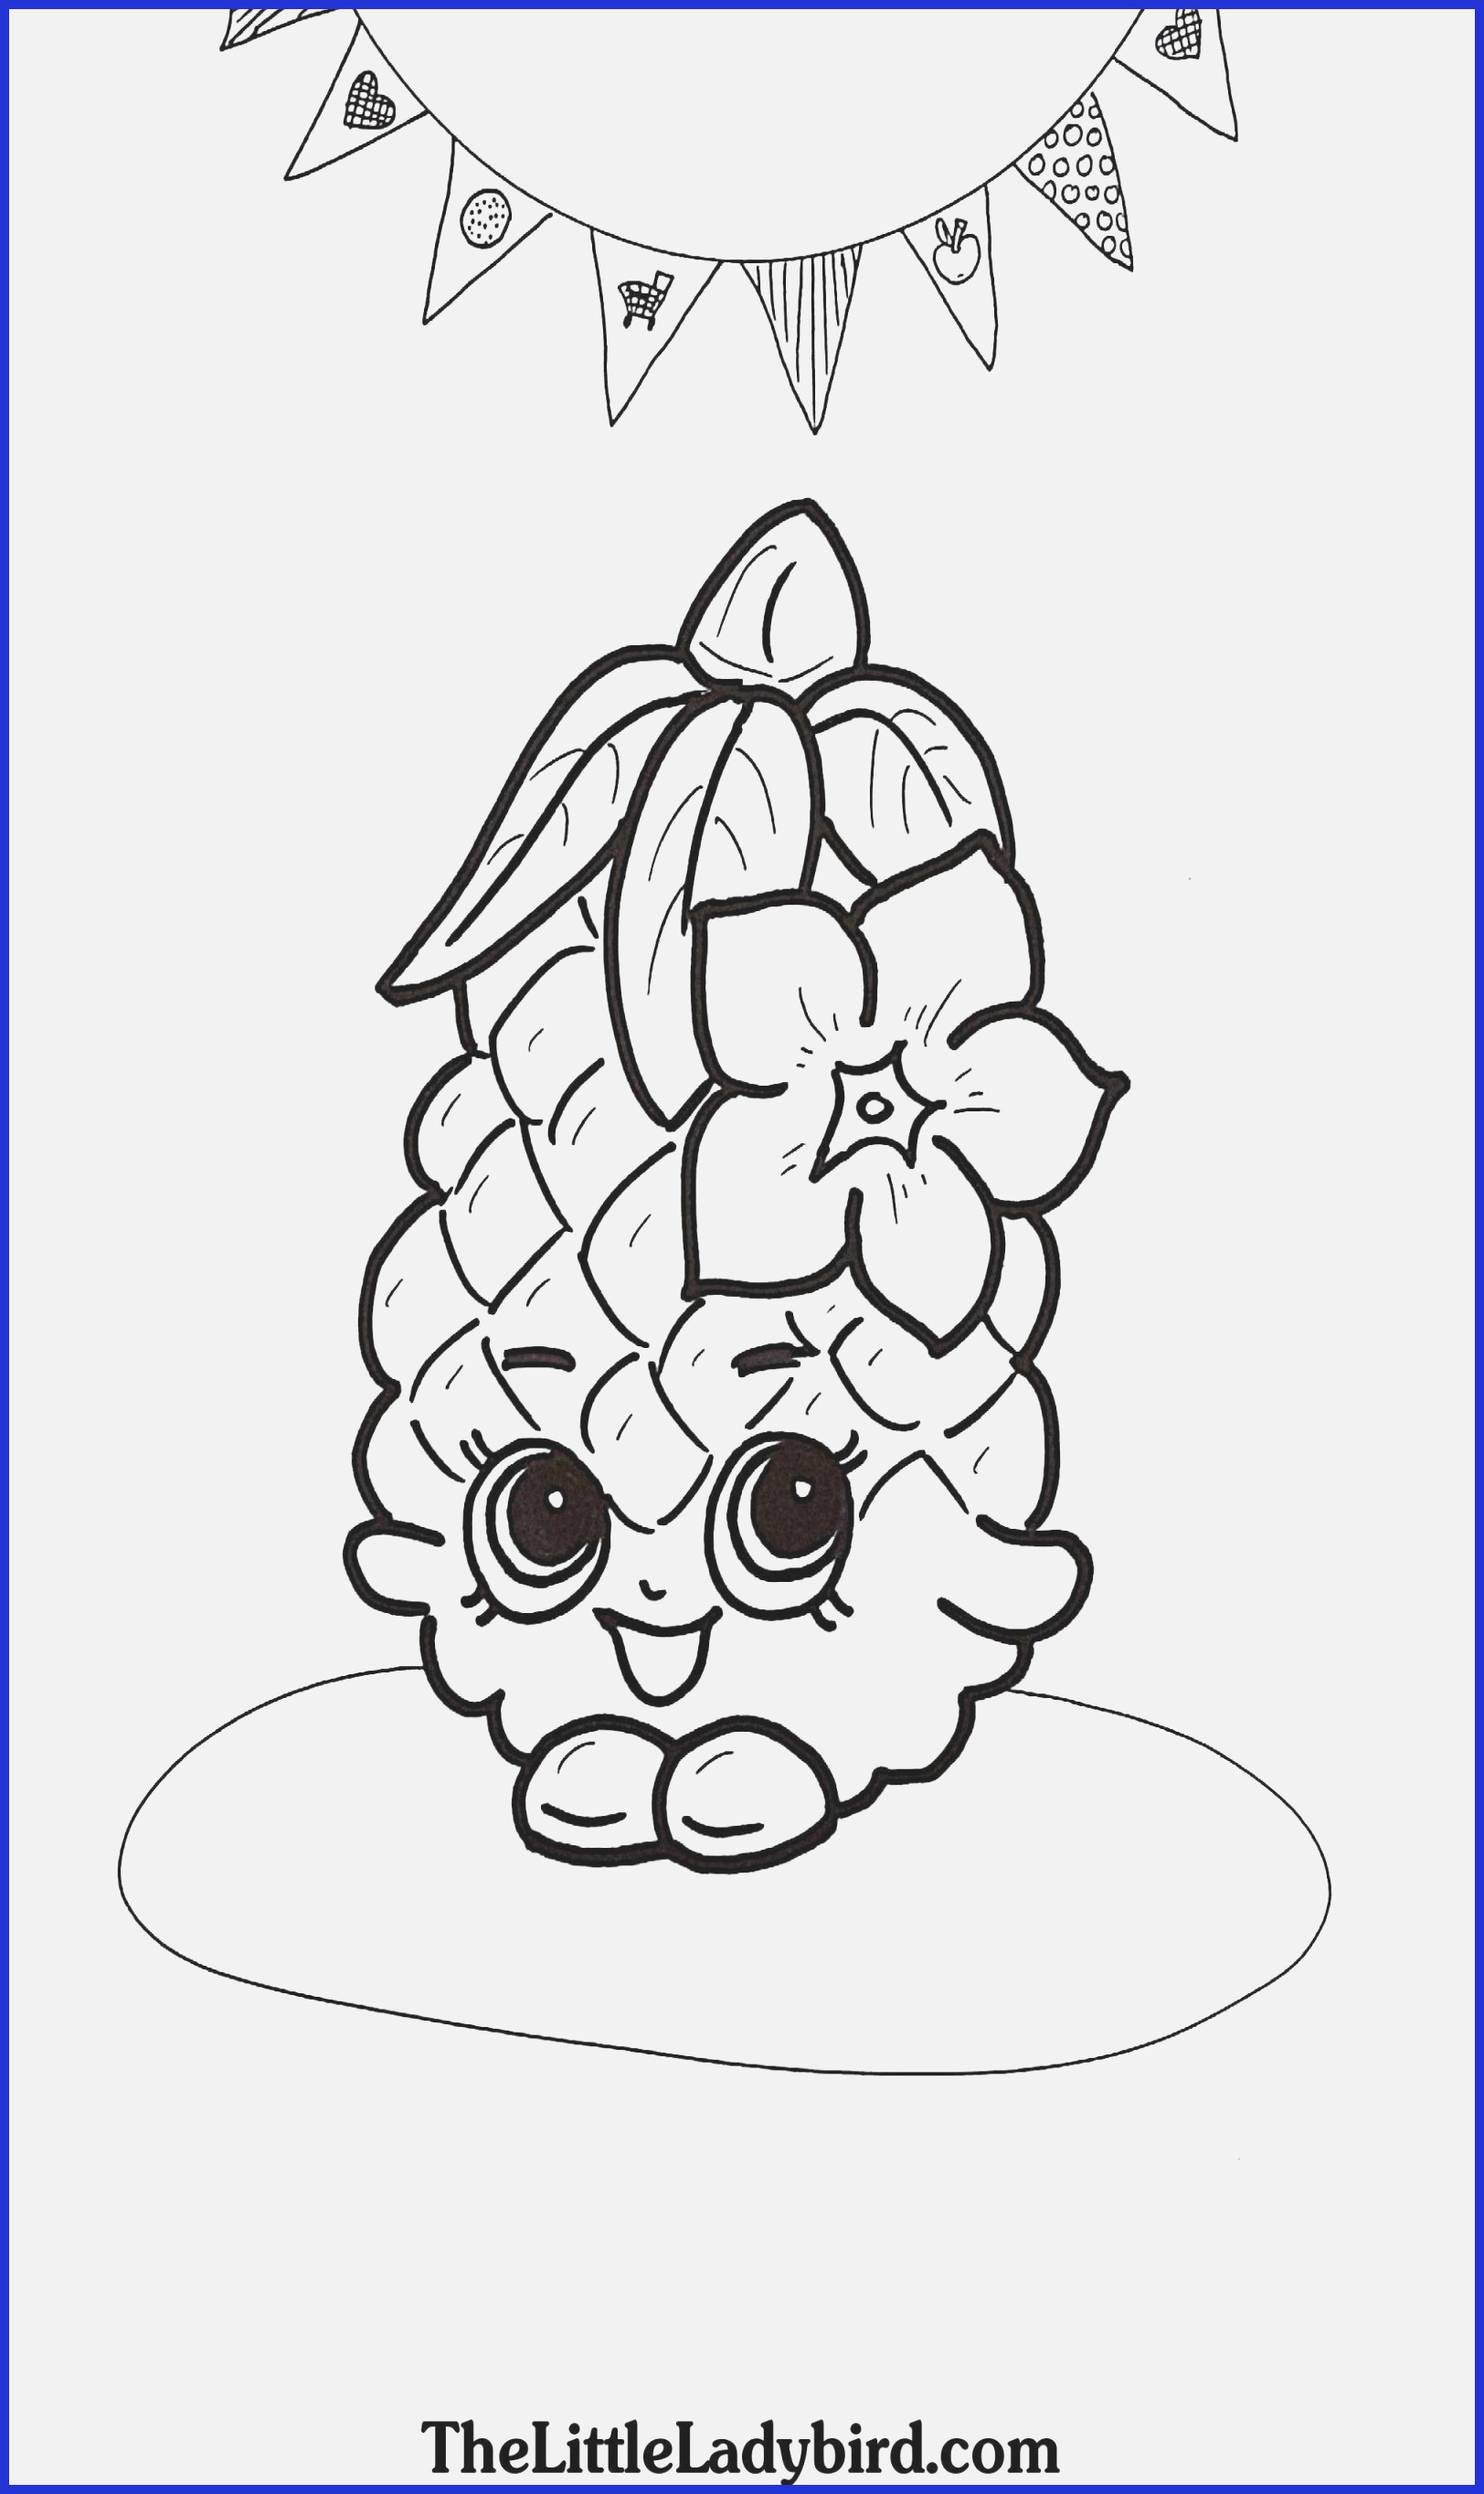 Cute Girl Coloring Pages February Coloring Sheets Cute Girl Coloring Pages Cute Girl Coloring